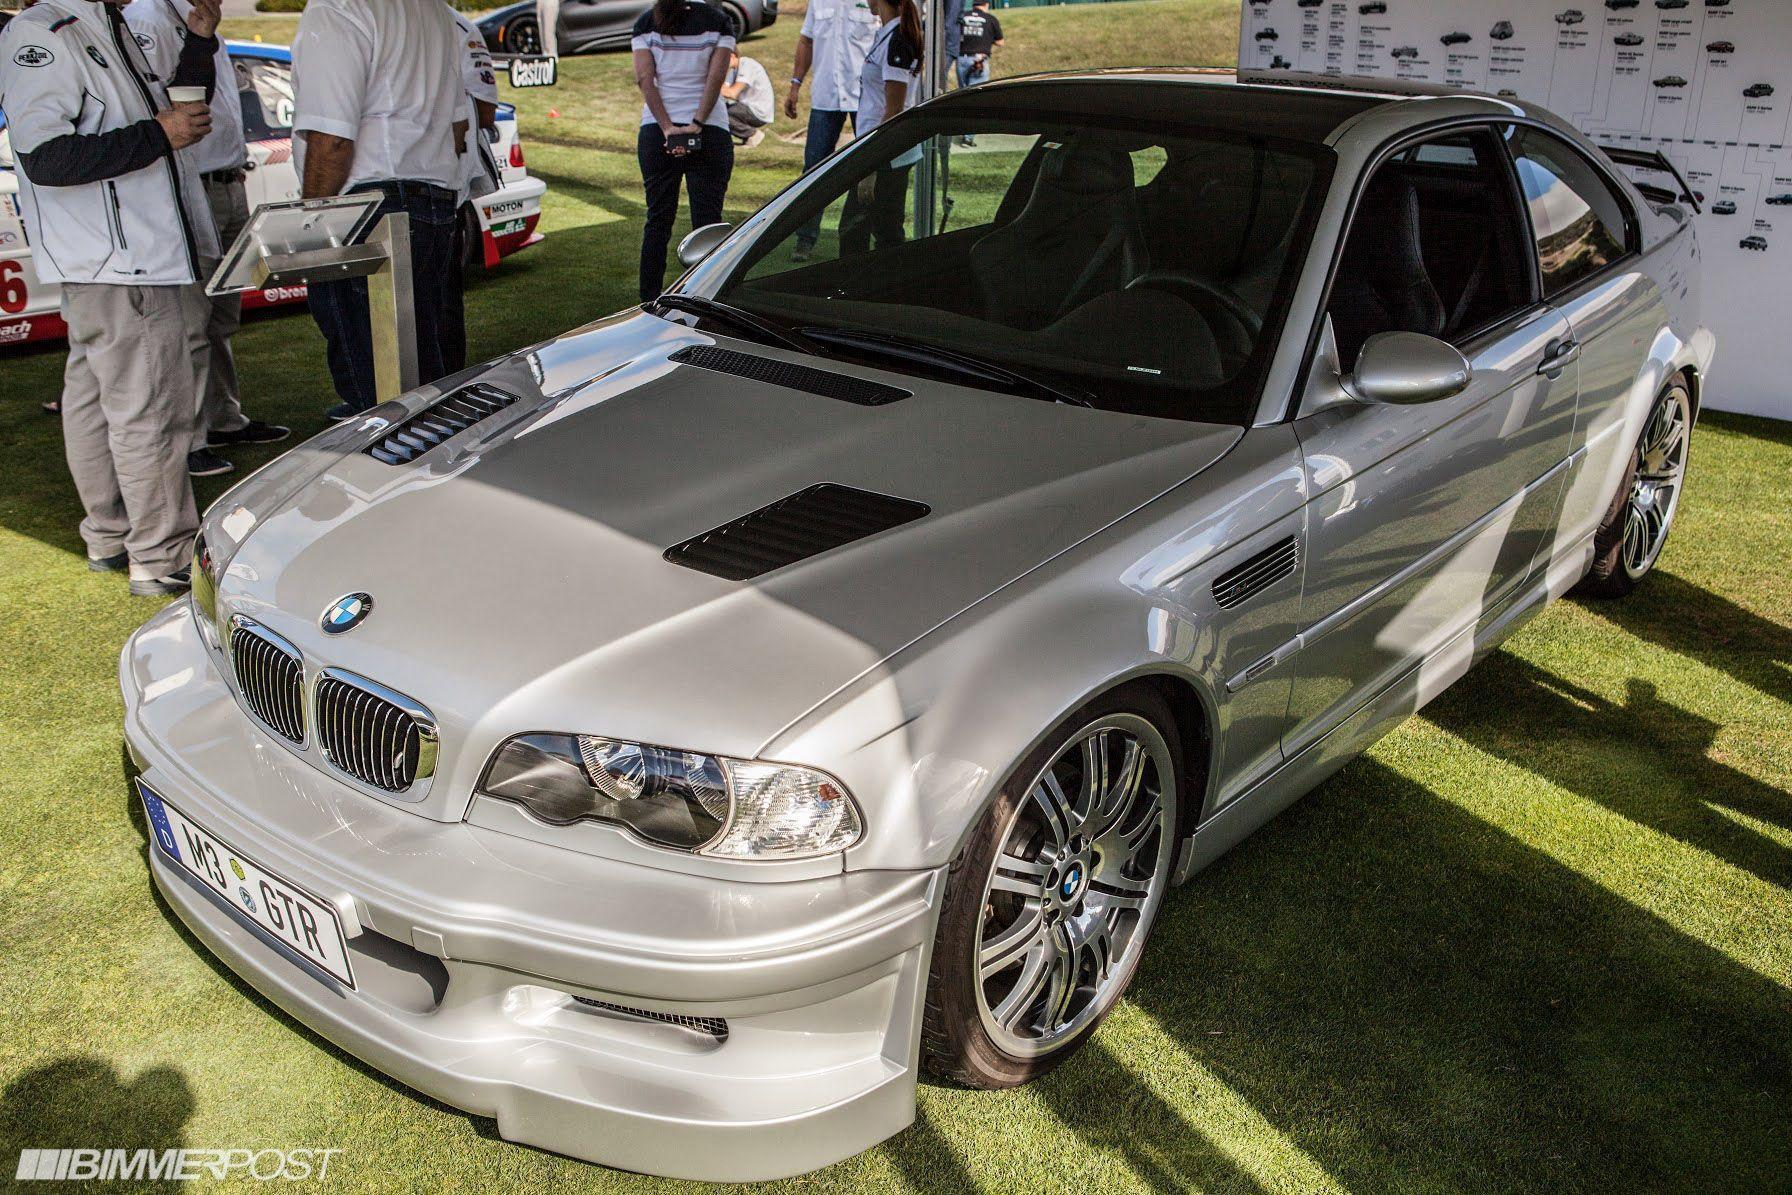 E46 M3 GTR Race and Road Car Presented at Pebble Beach Live